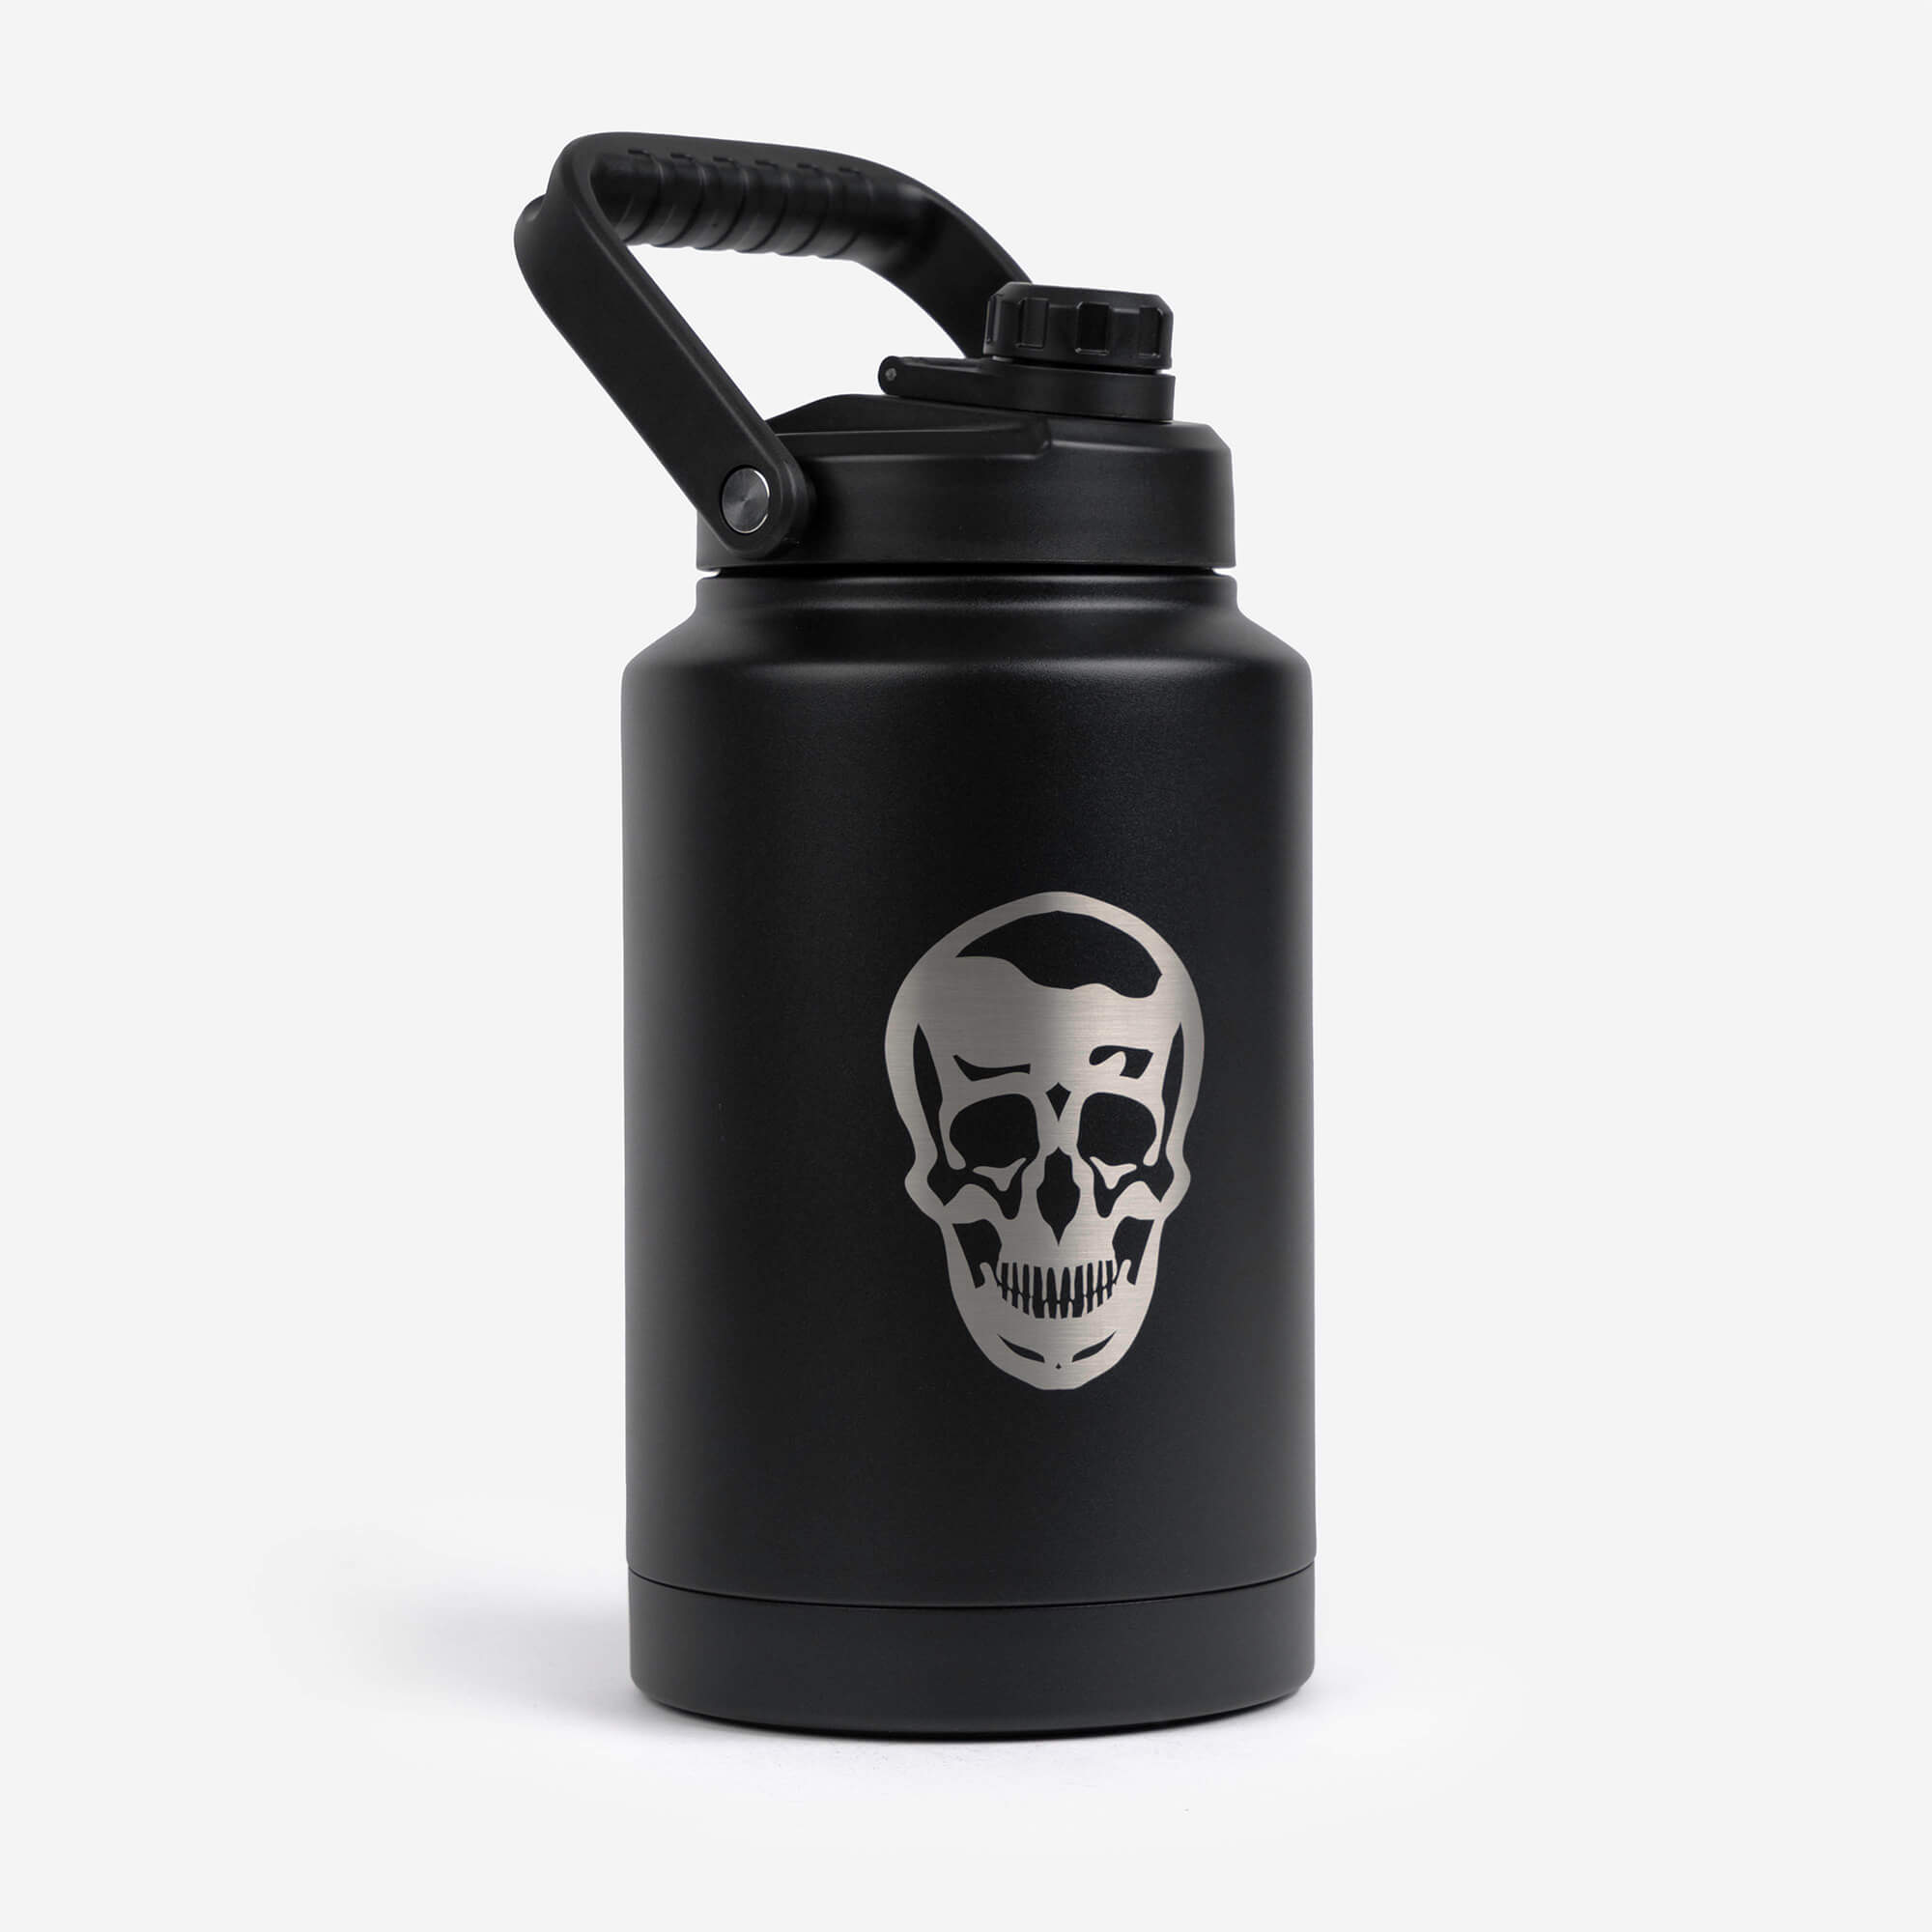 Gymreapers 128 oz Stainless Steel Water Bottle